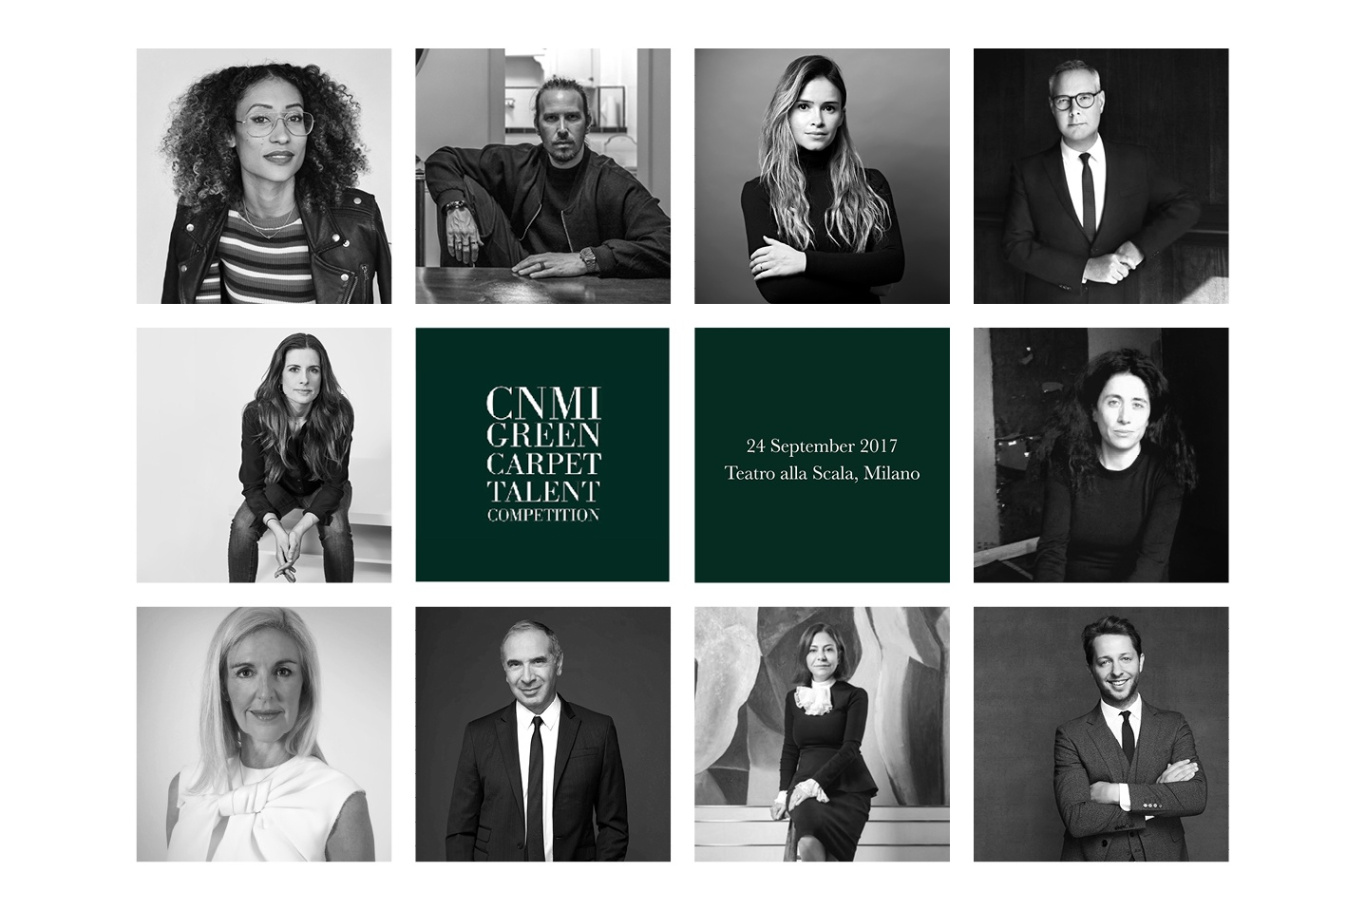 The GCC Fashion Awards, Italia announces international judging panel and 10 semi-finalists for the CNMI Green Carpet Talent Competition﻿